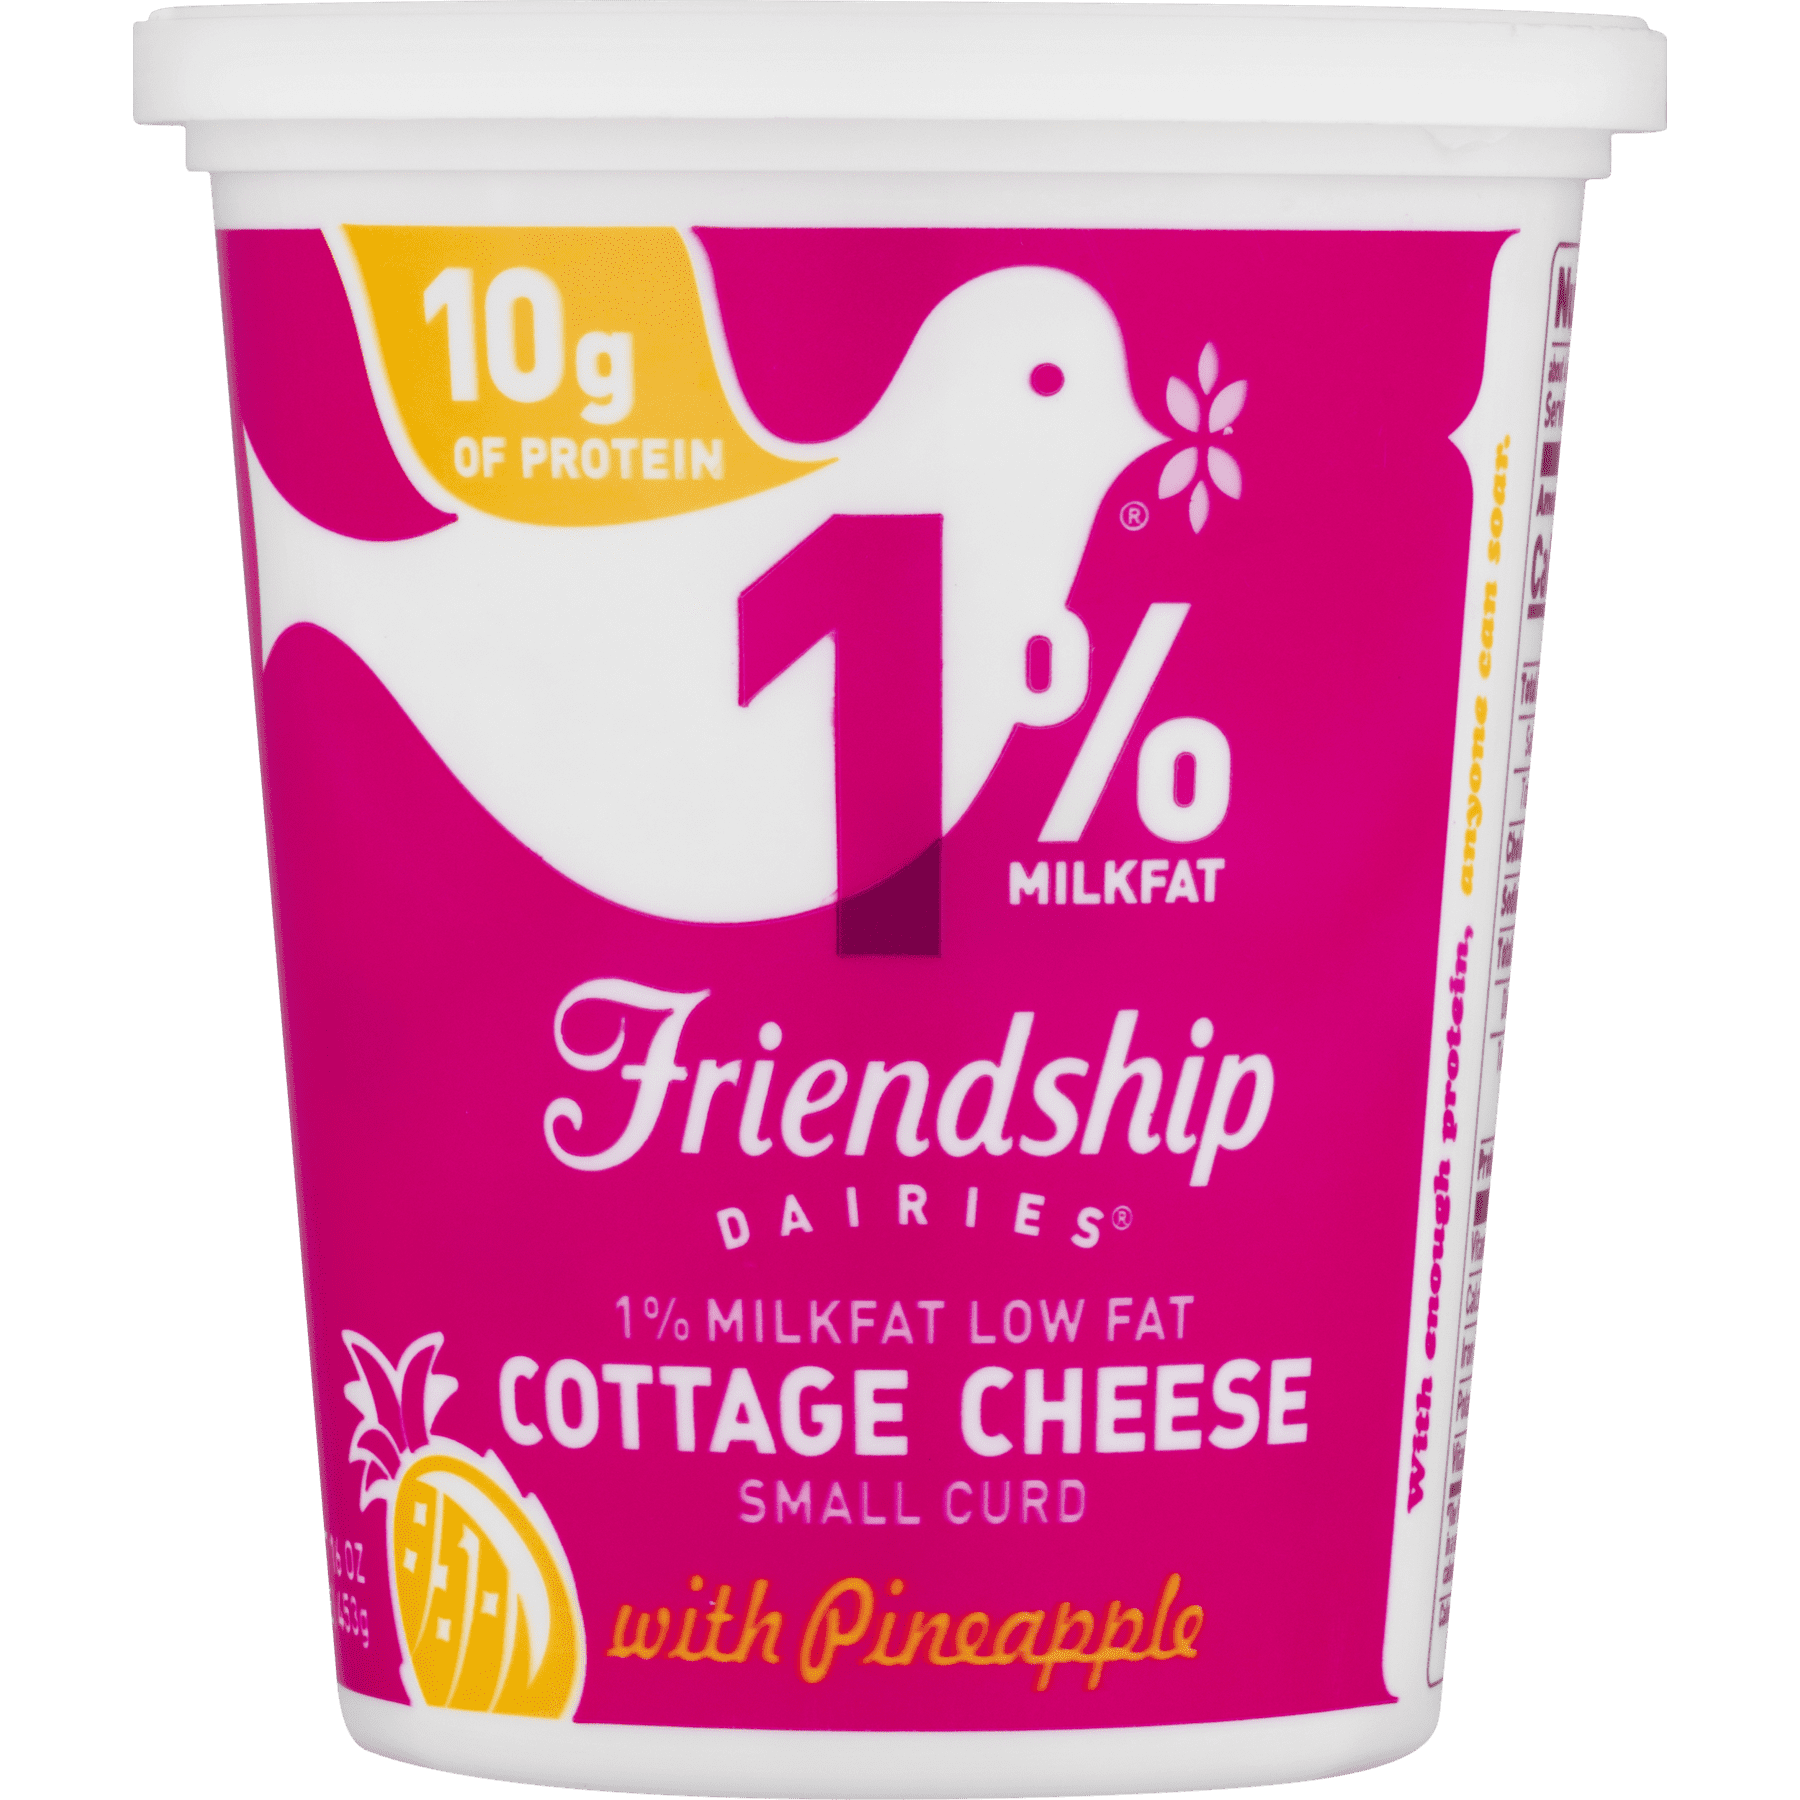 Friendship Dairies 1 Milk Fat Cottage Cheese With Pineapple 16